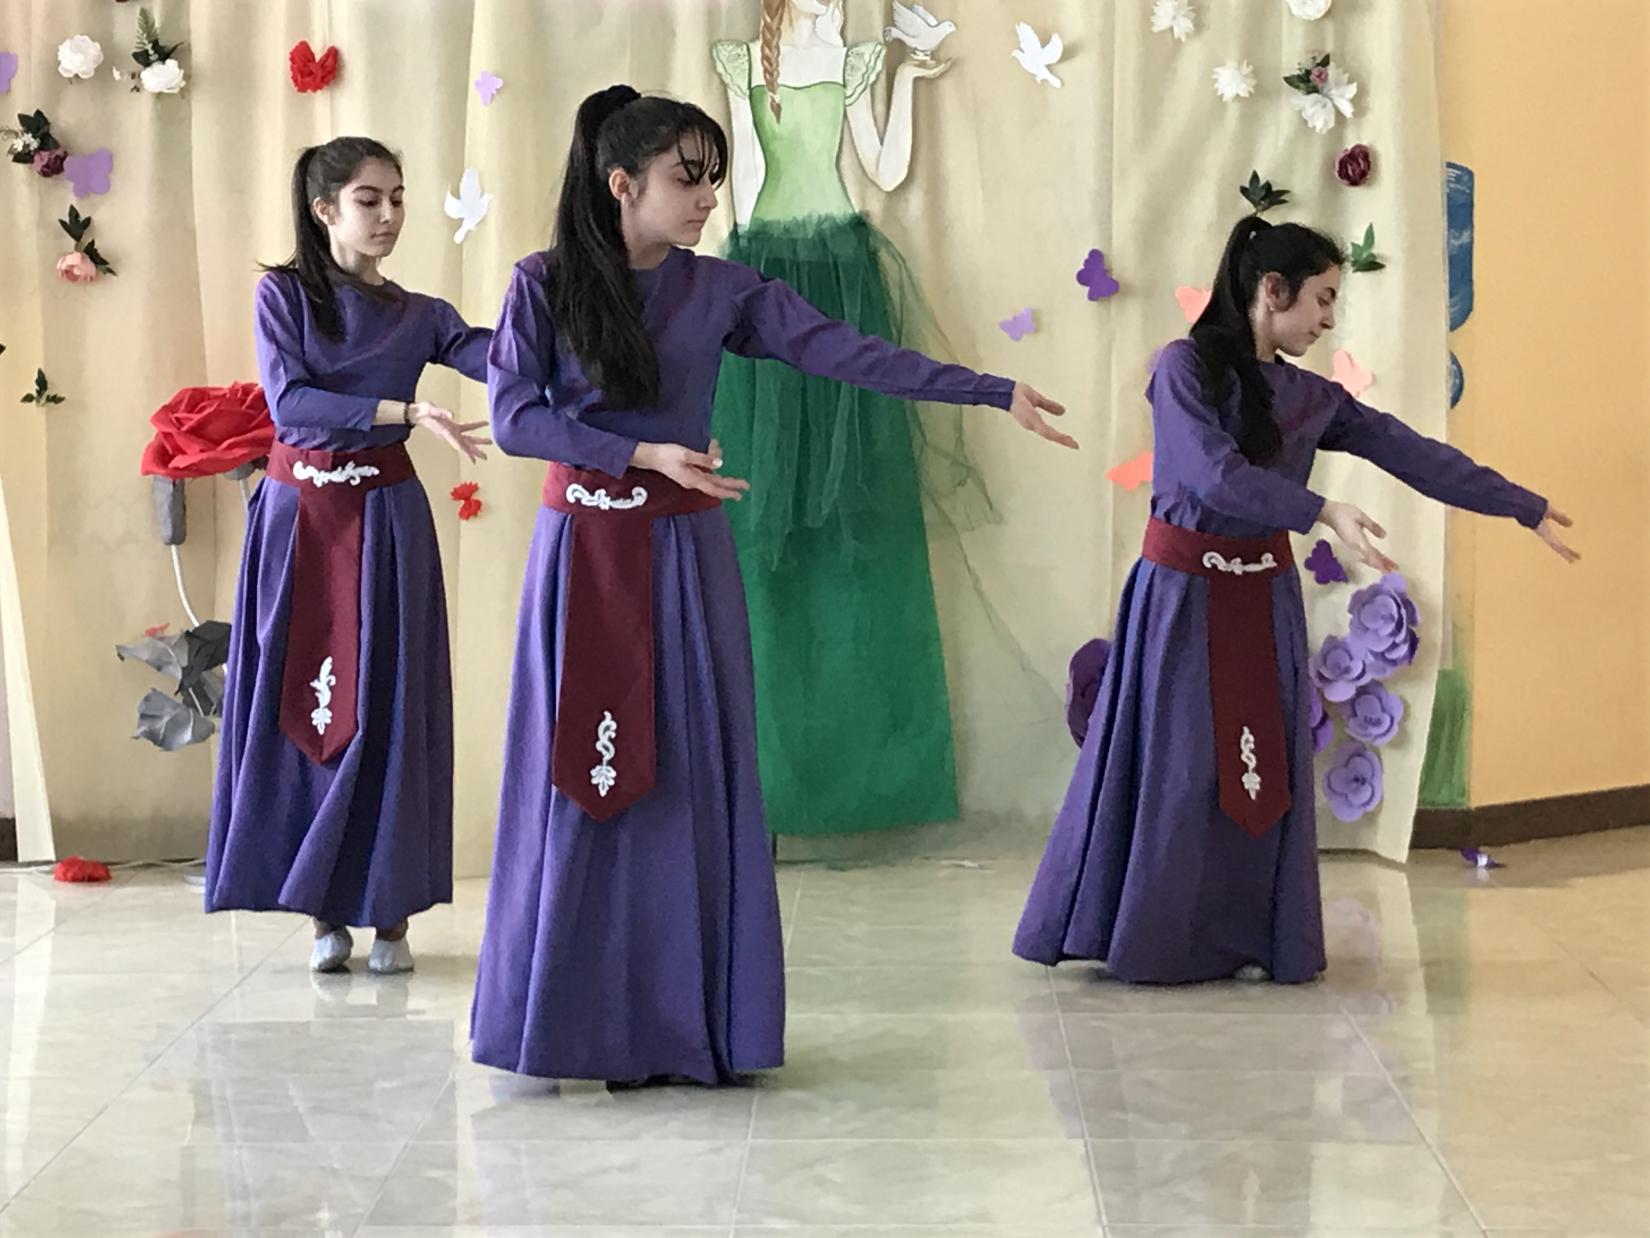 Three young girls from No. 1 secondary school in Metsamor dancing traditional Armenian dance